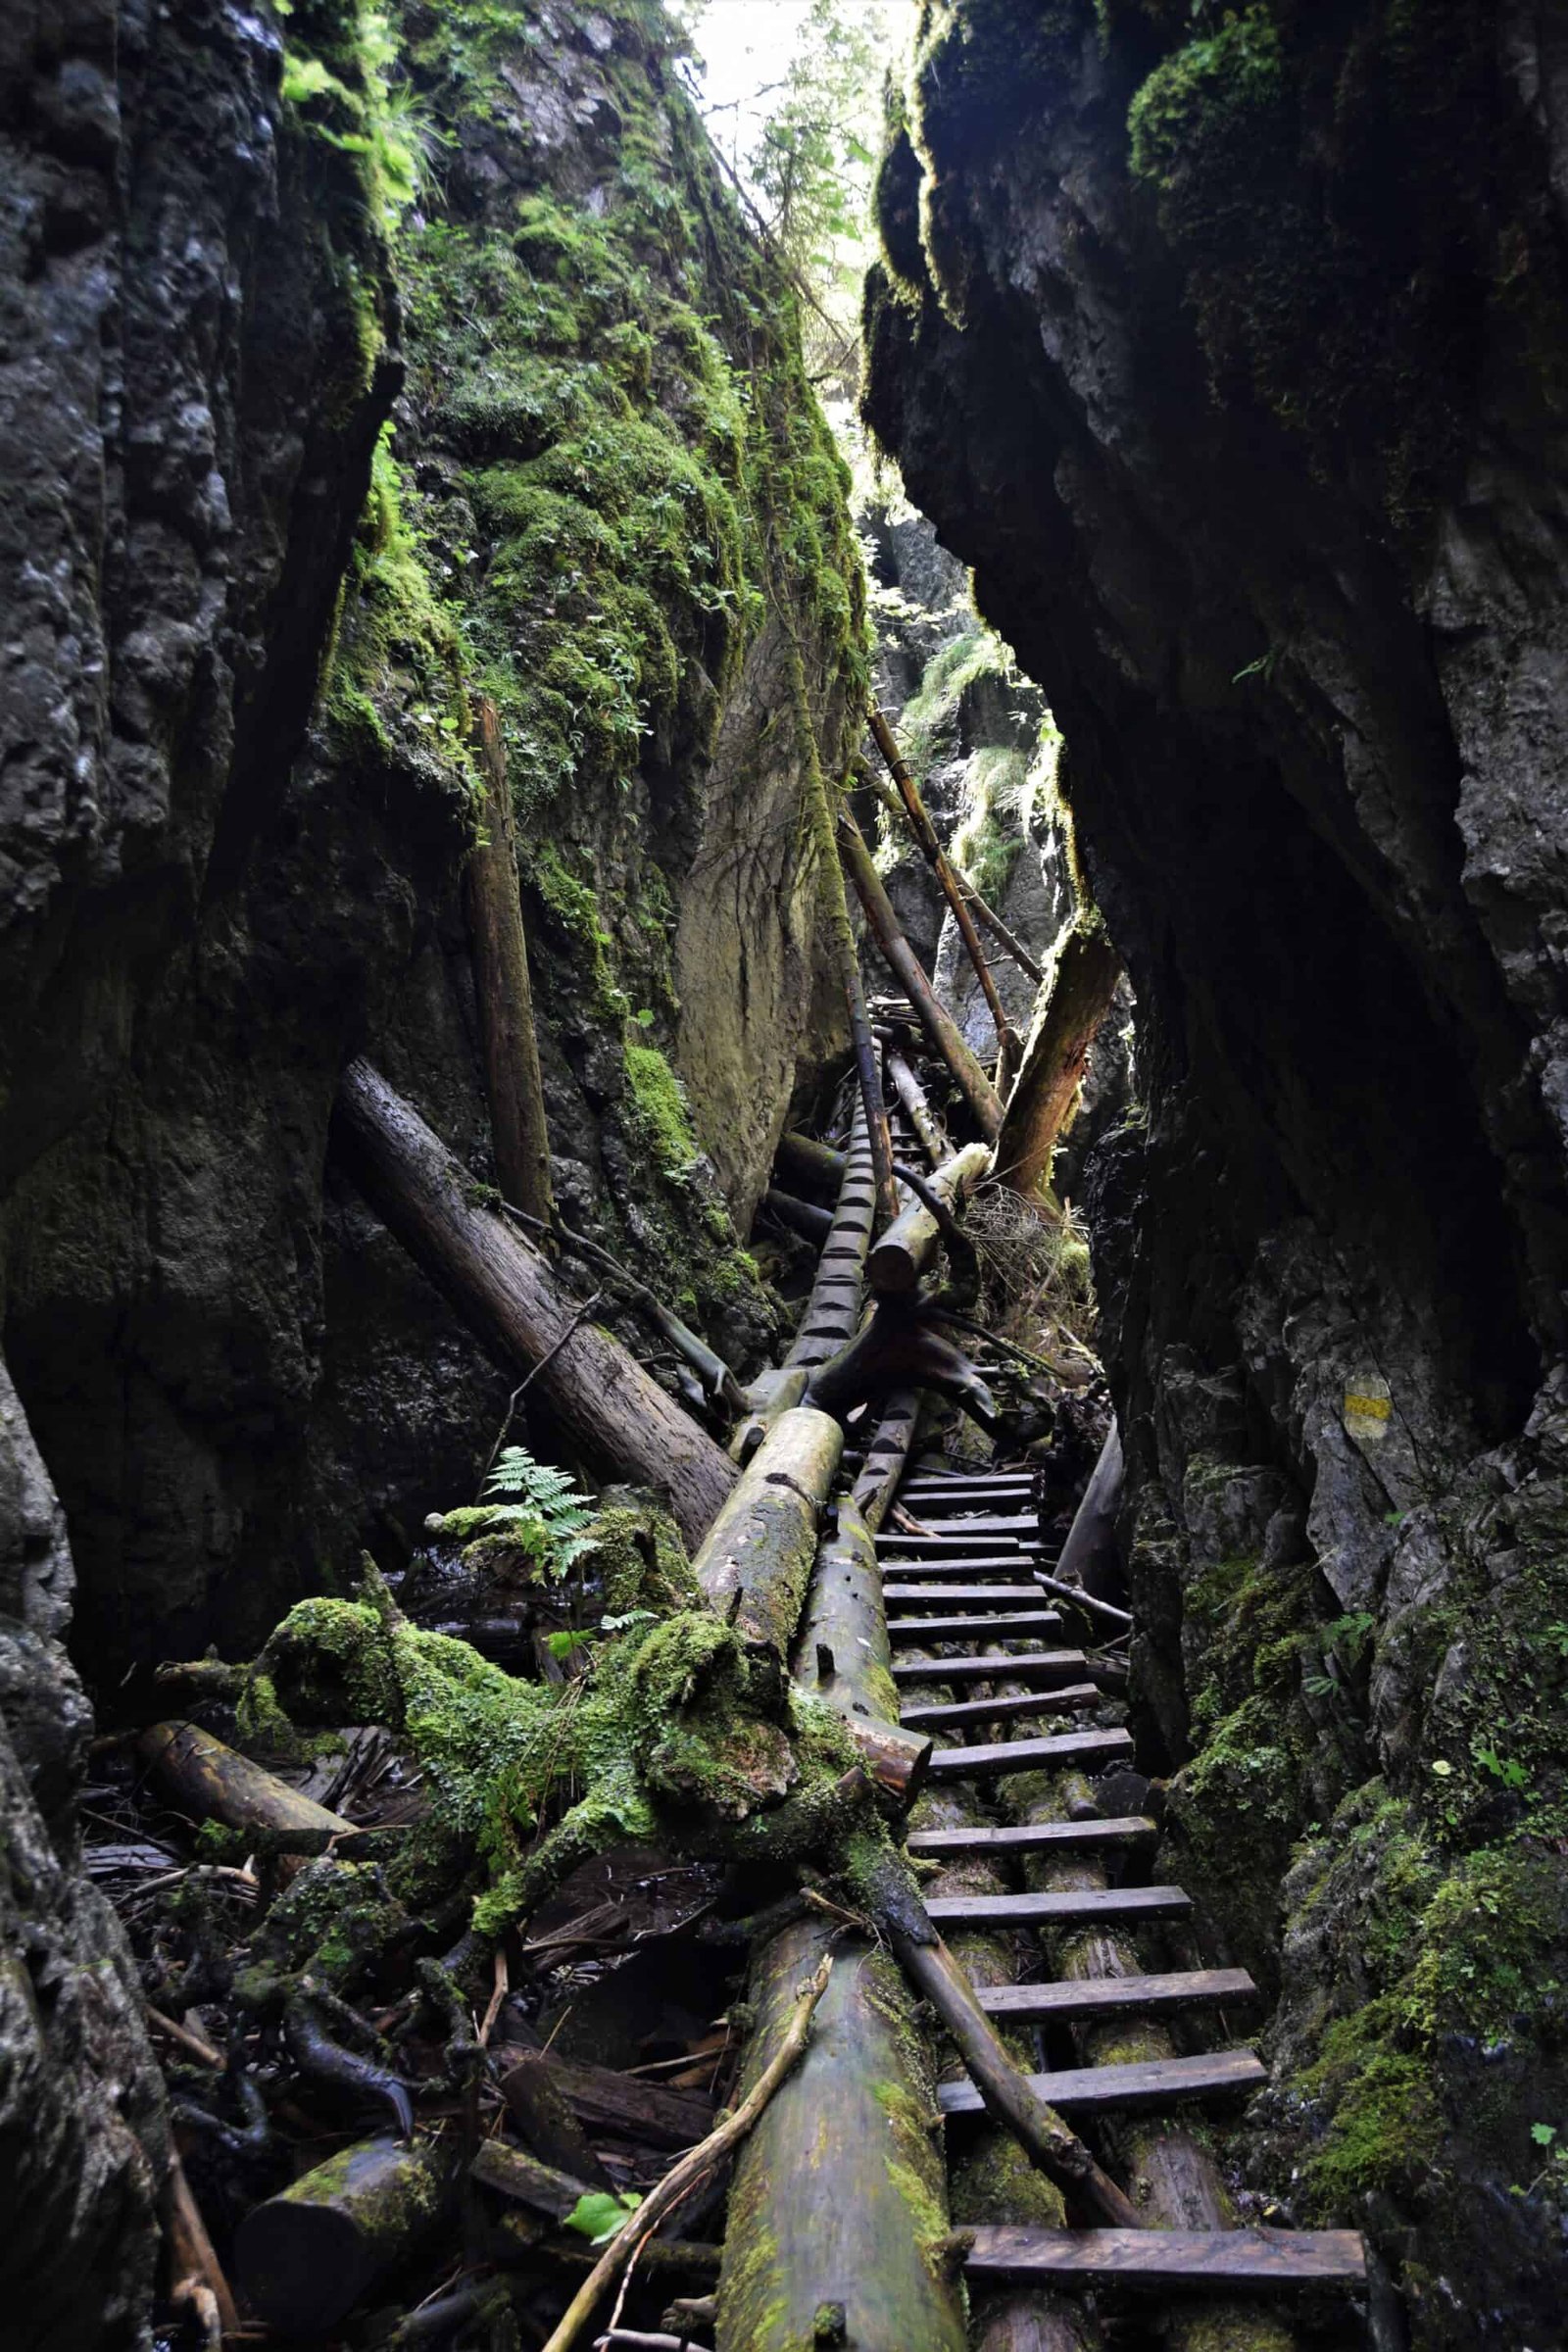 a wooden walkway leading through an extremely narrow crevice in the rock next to a large fallen tree, Sokol Gorge, Slovakia